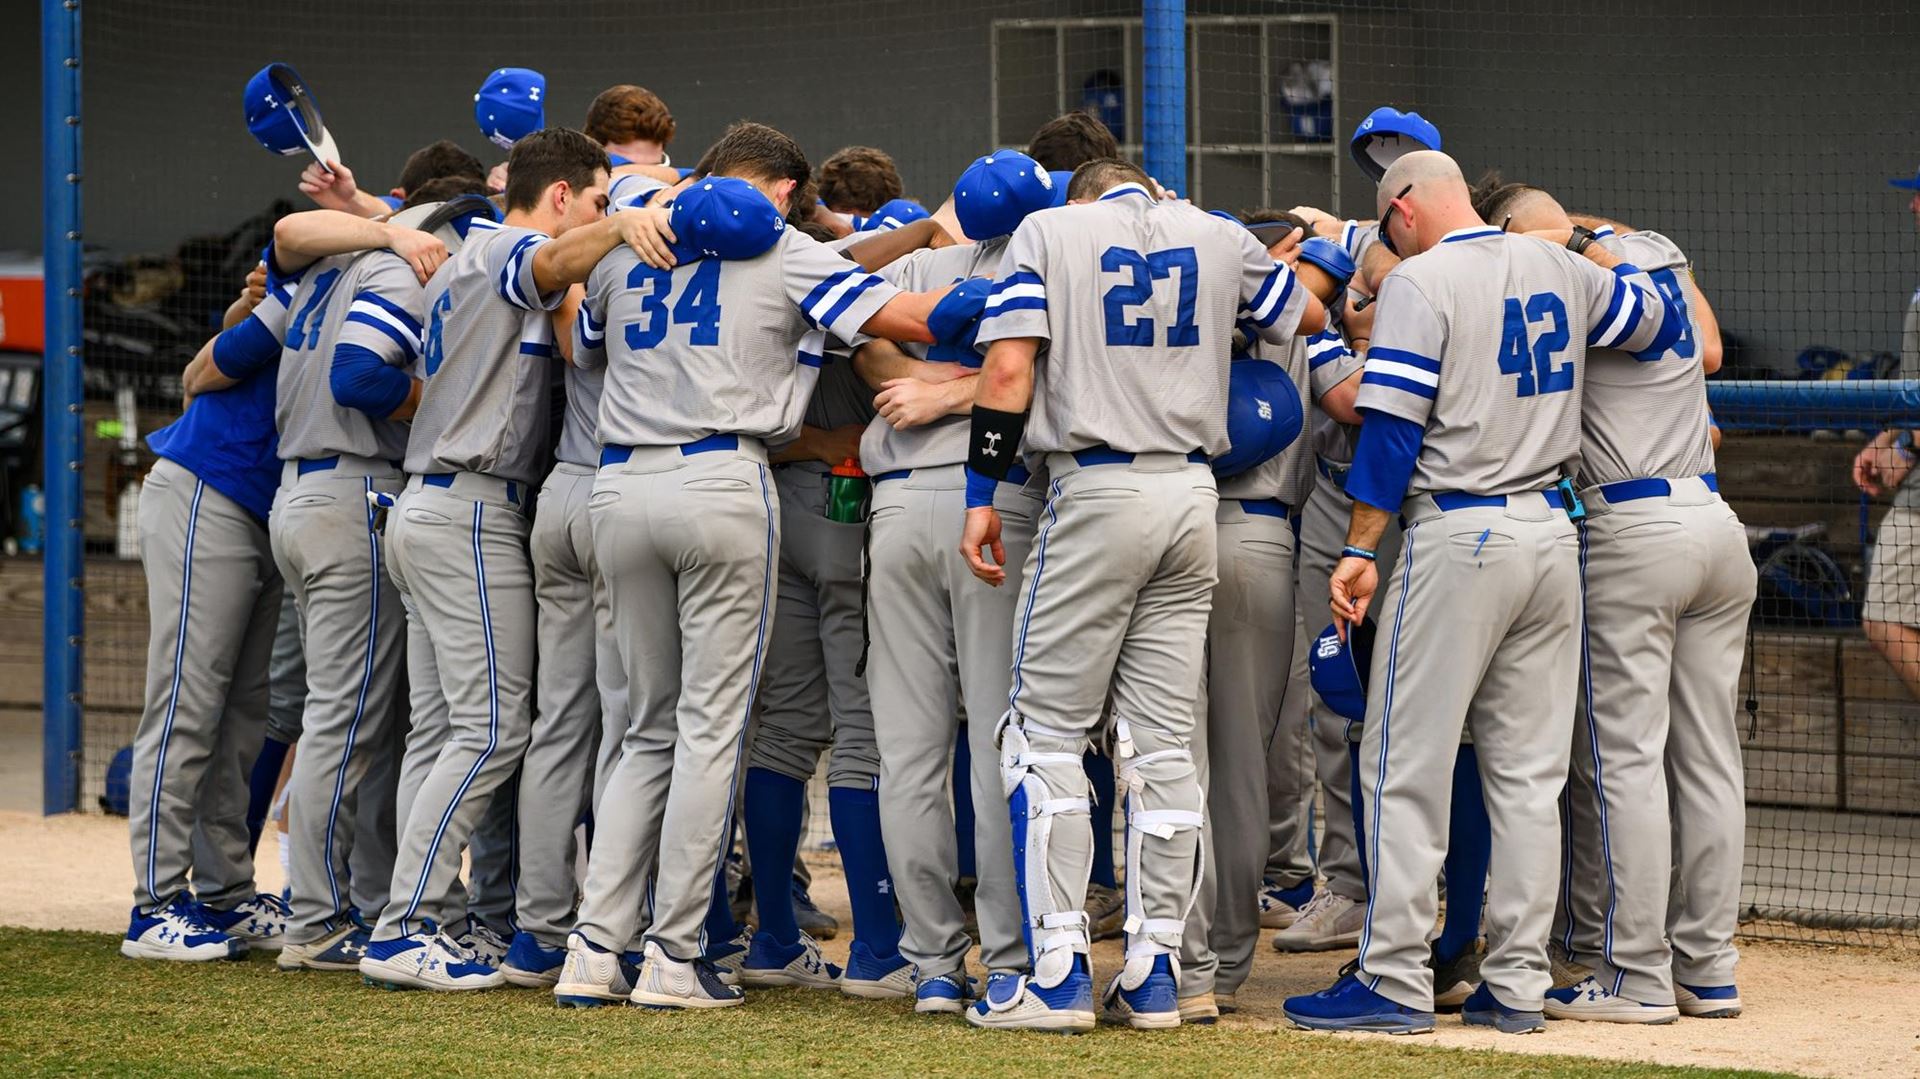 The Seton Hall baseball team huddles on the field during a game.